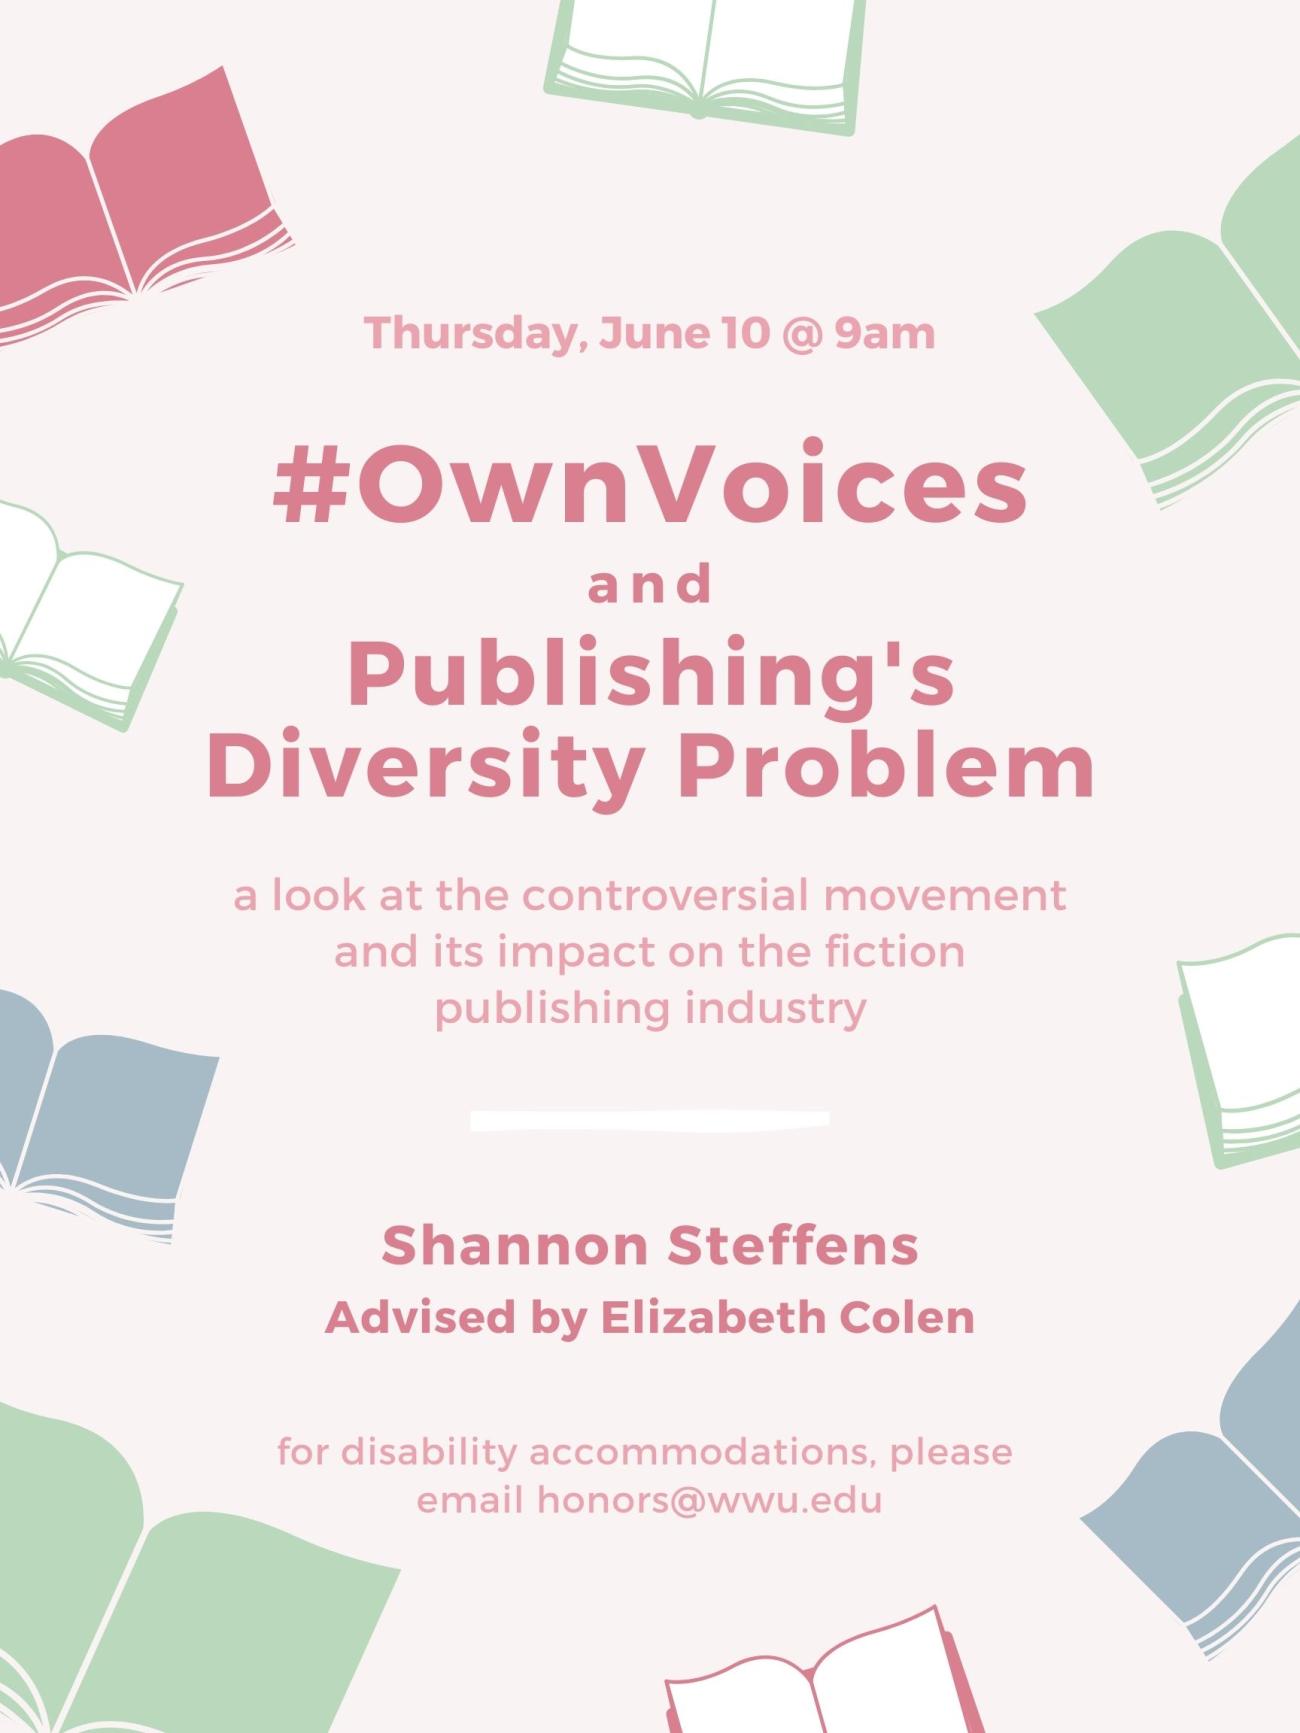 Light pink poster with clip art of open books around pink text that reads, "#OwnVoices and Publishing's Diversity Problem: A look at the controversial movement and its impact on the fiction publishing industry. Shannon Steffens, advised by Elizabeth Colen. Thursday, June 10 at 9 am. For disability accommodations please email honors@wwu.edu". 